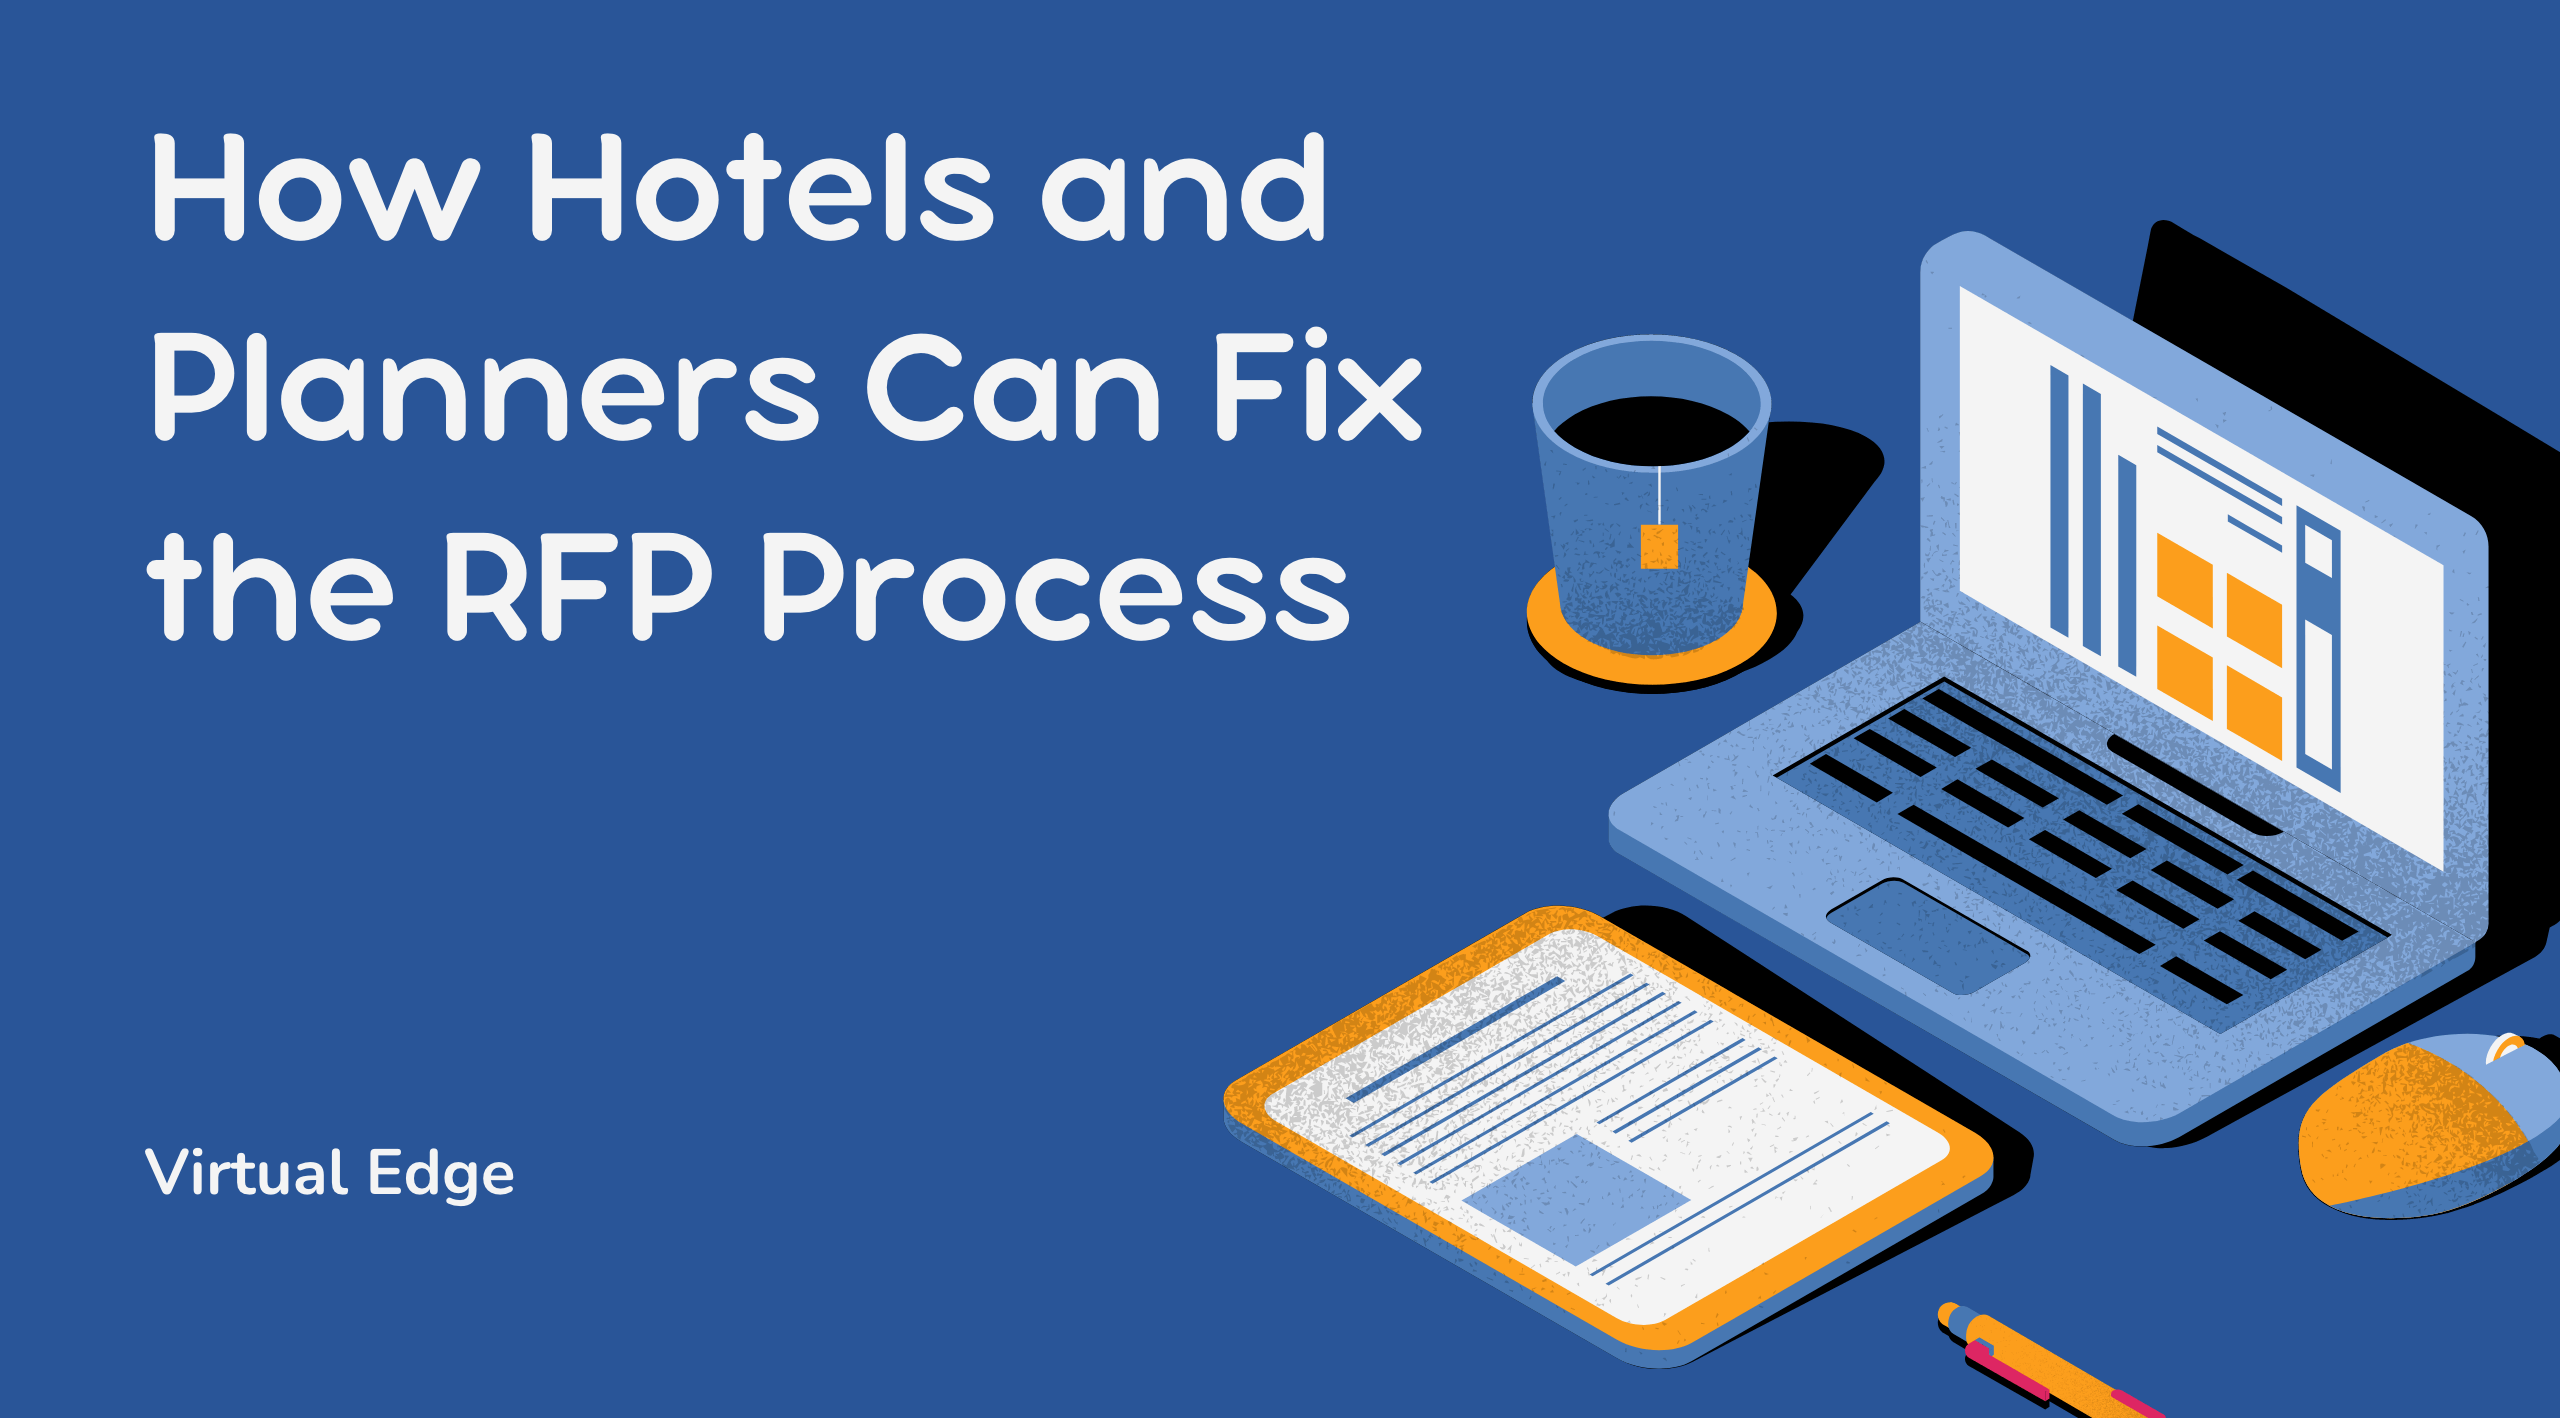 How Hotels and Planners Can Fix the RFP Process